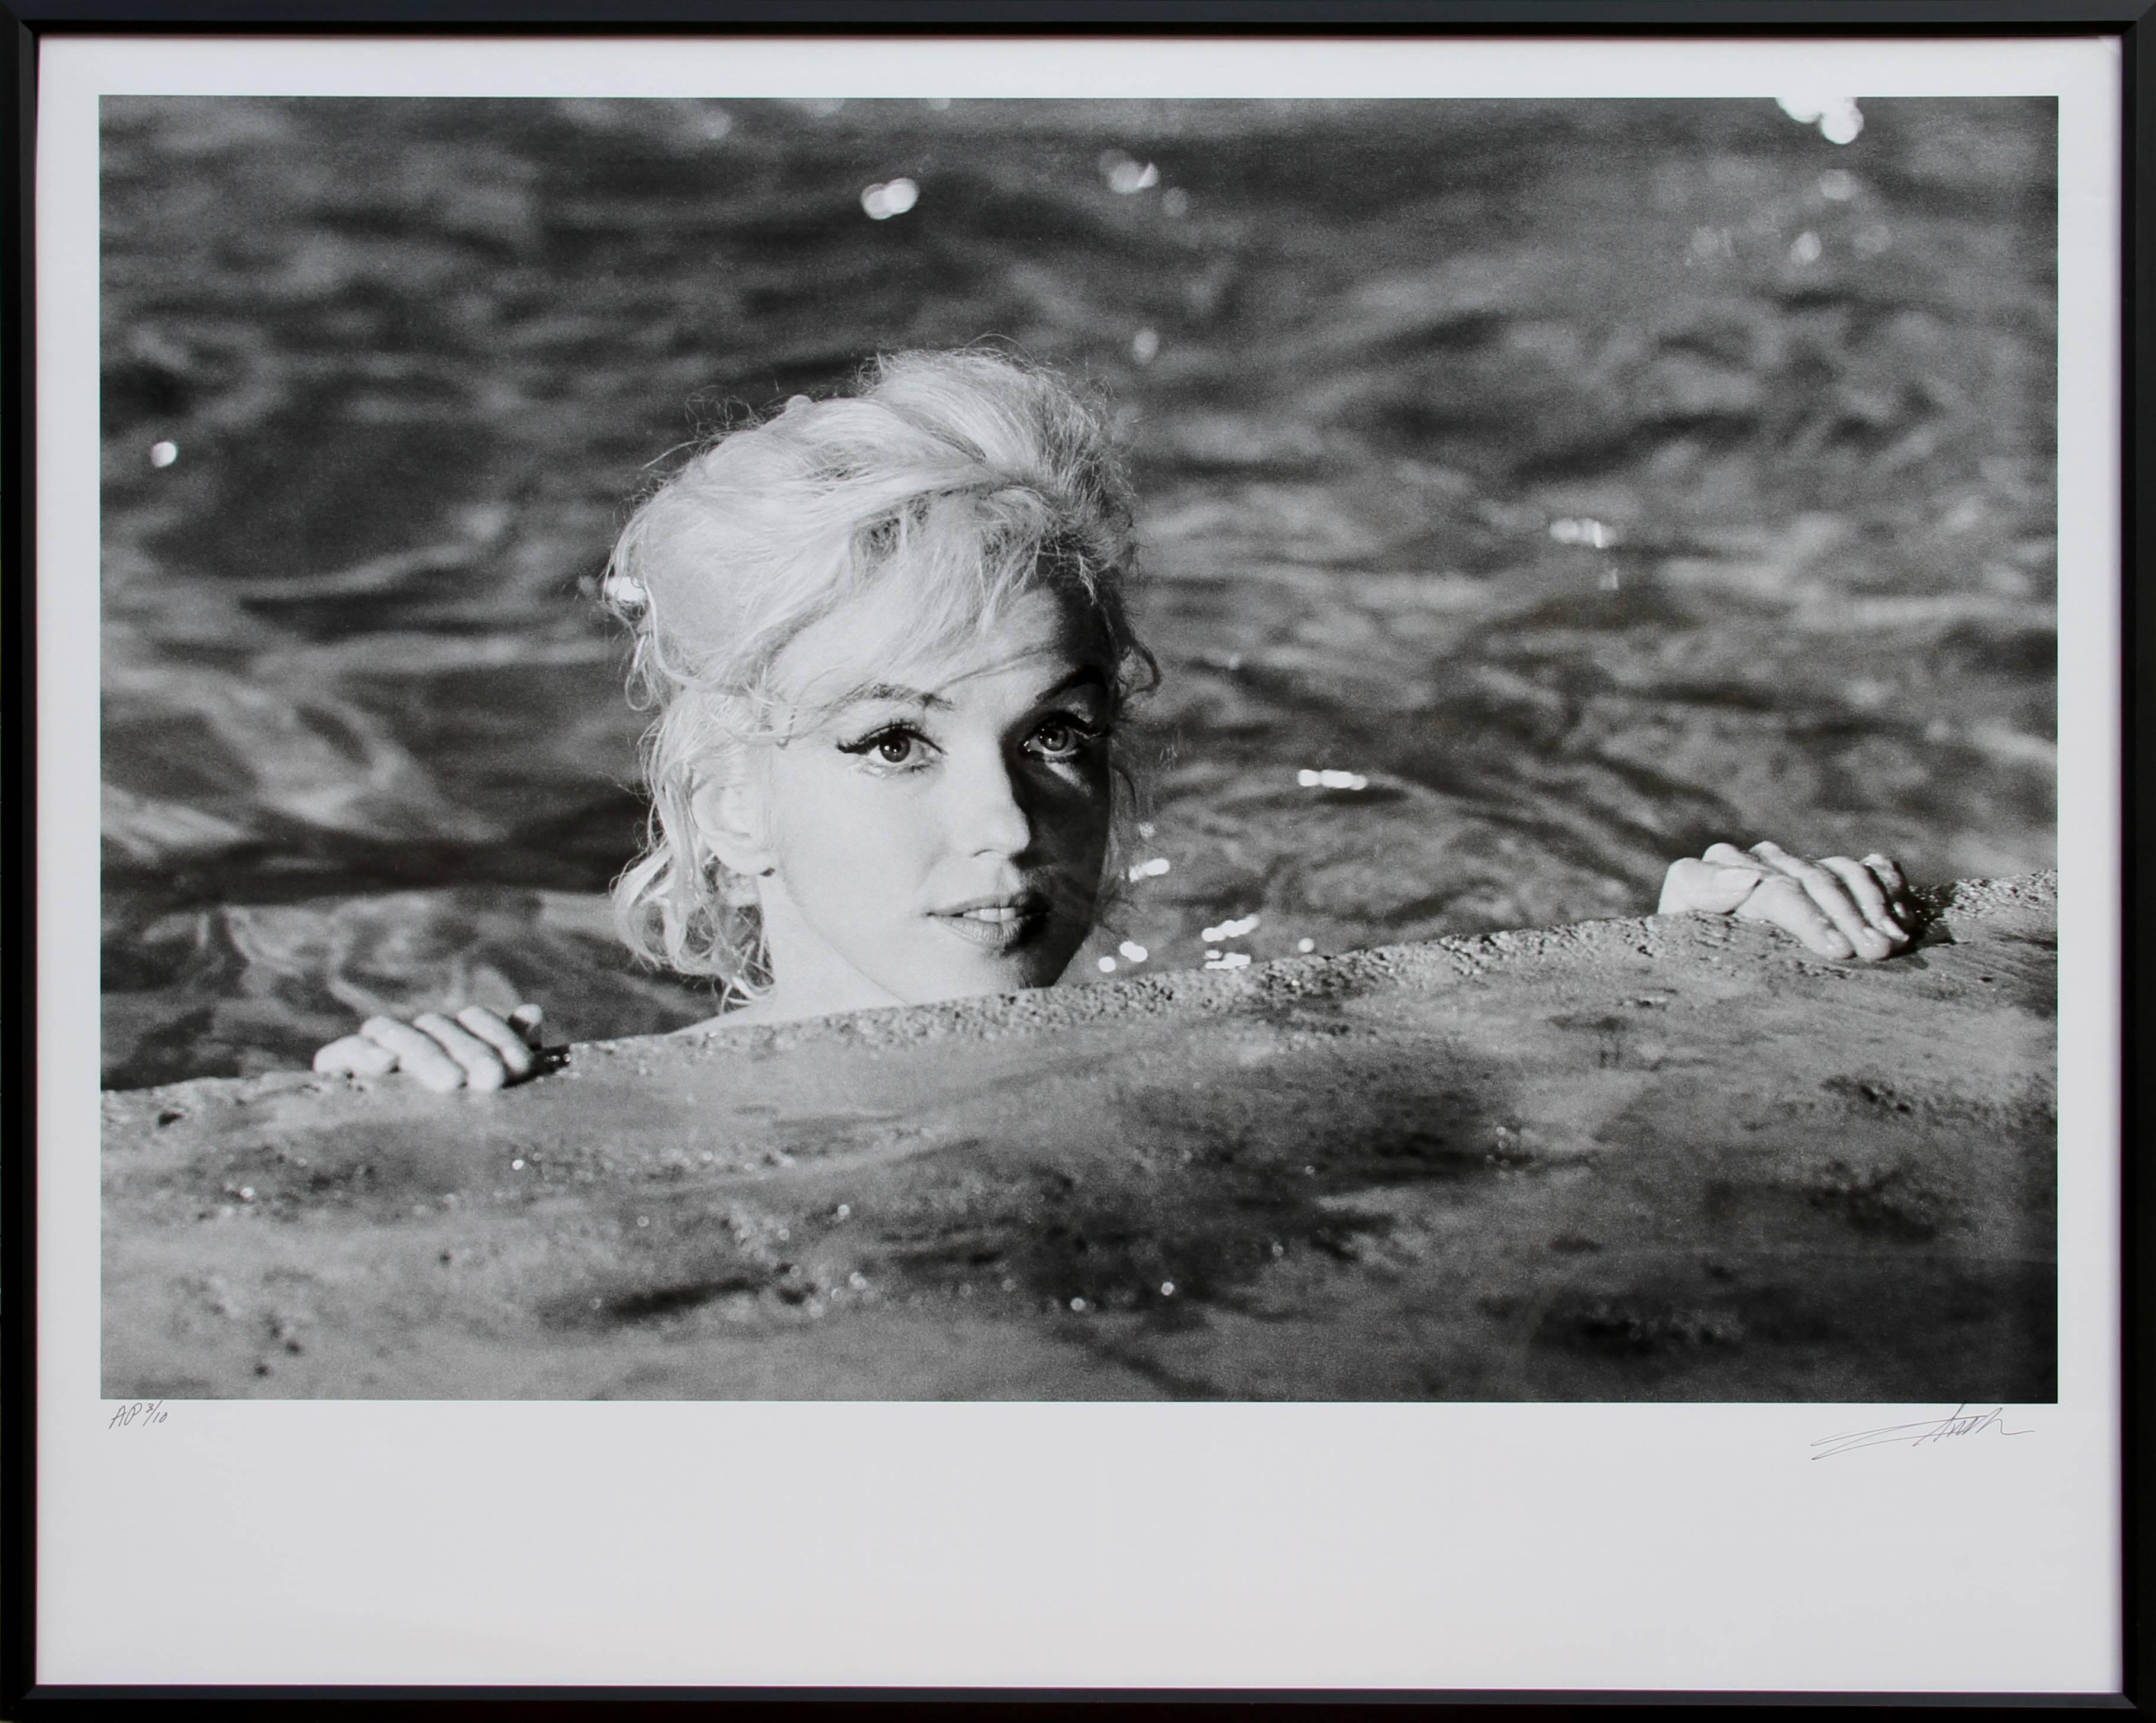 Lawrence Schiller Figurative Photograph - Marilyn Monroe in Something's Got to Give - 5